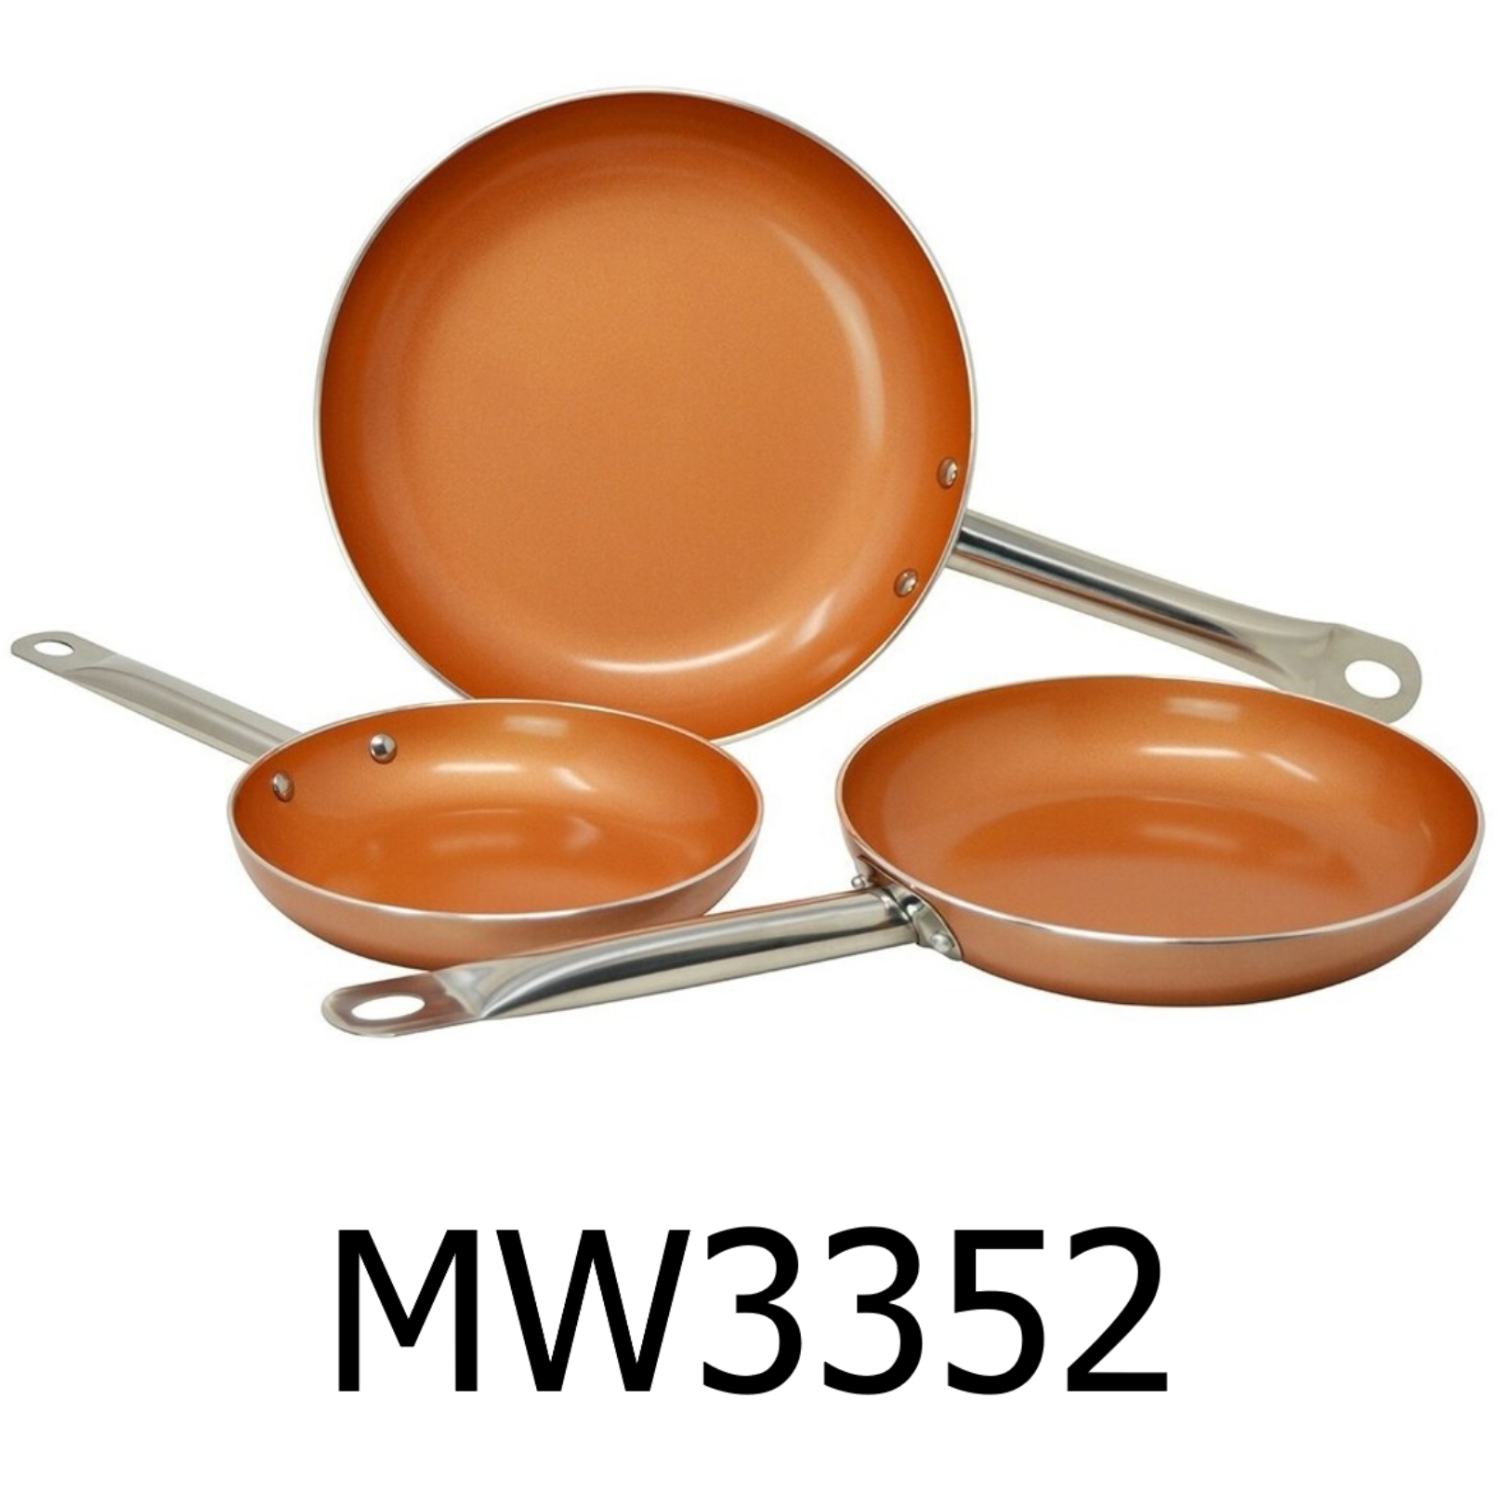 PC 8-in-1 Non-Stick Everything Pan 3 Piece Set